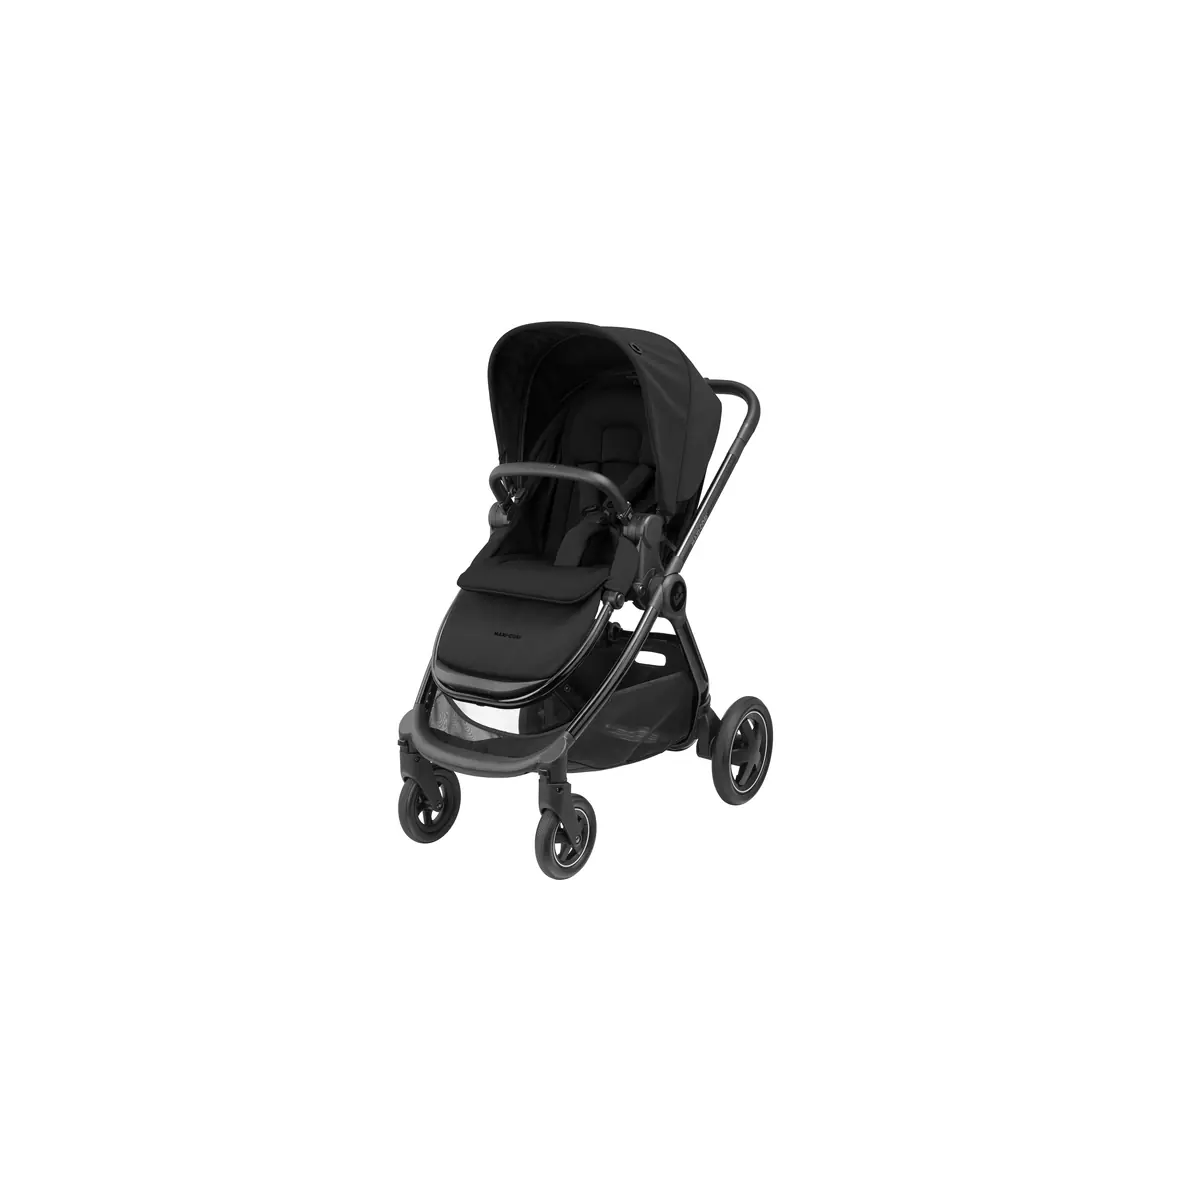 Image of Maxi Cosi Adorra Luxe Stroller With Black Chassis-Twillic Black